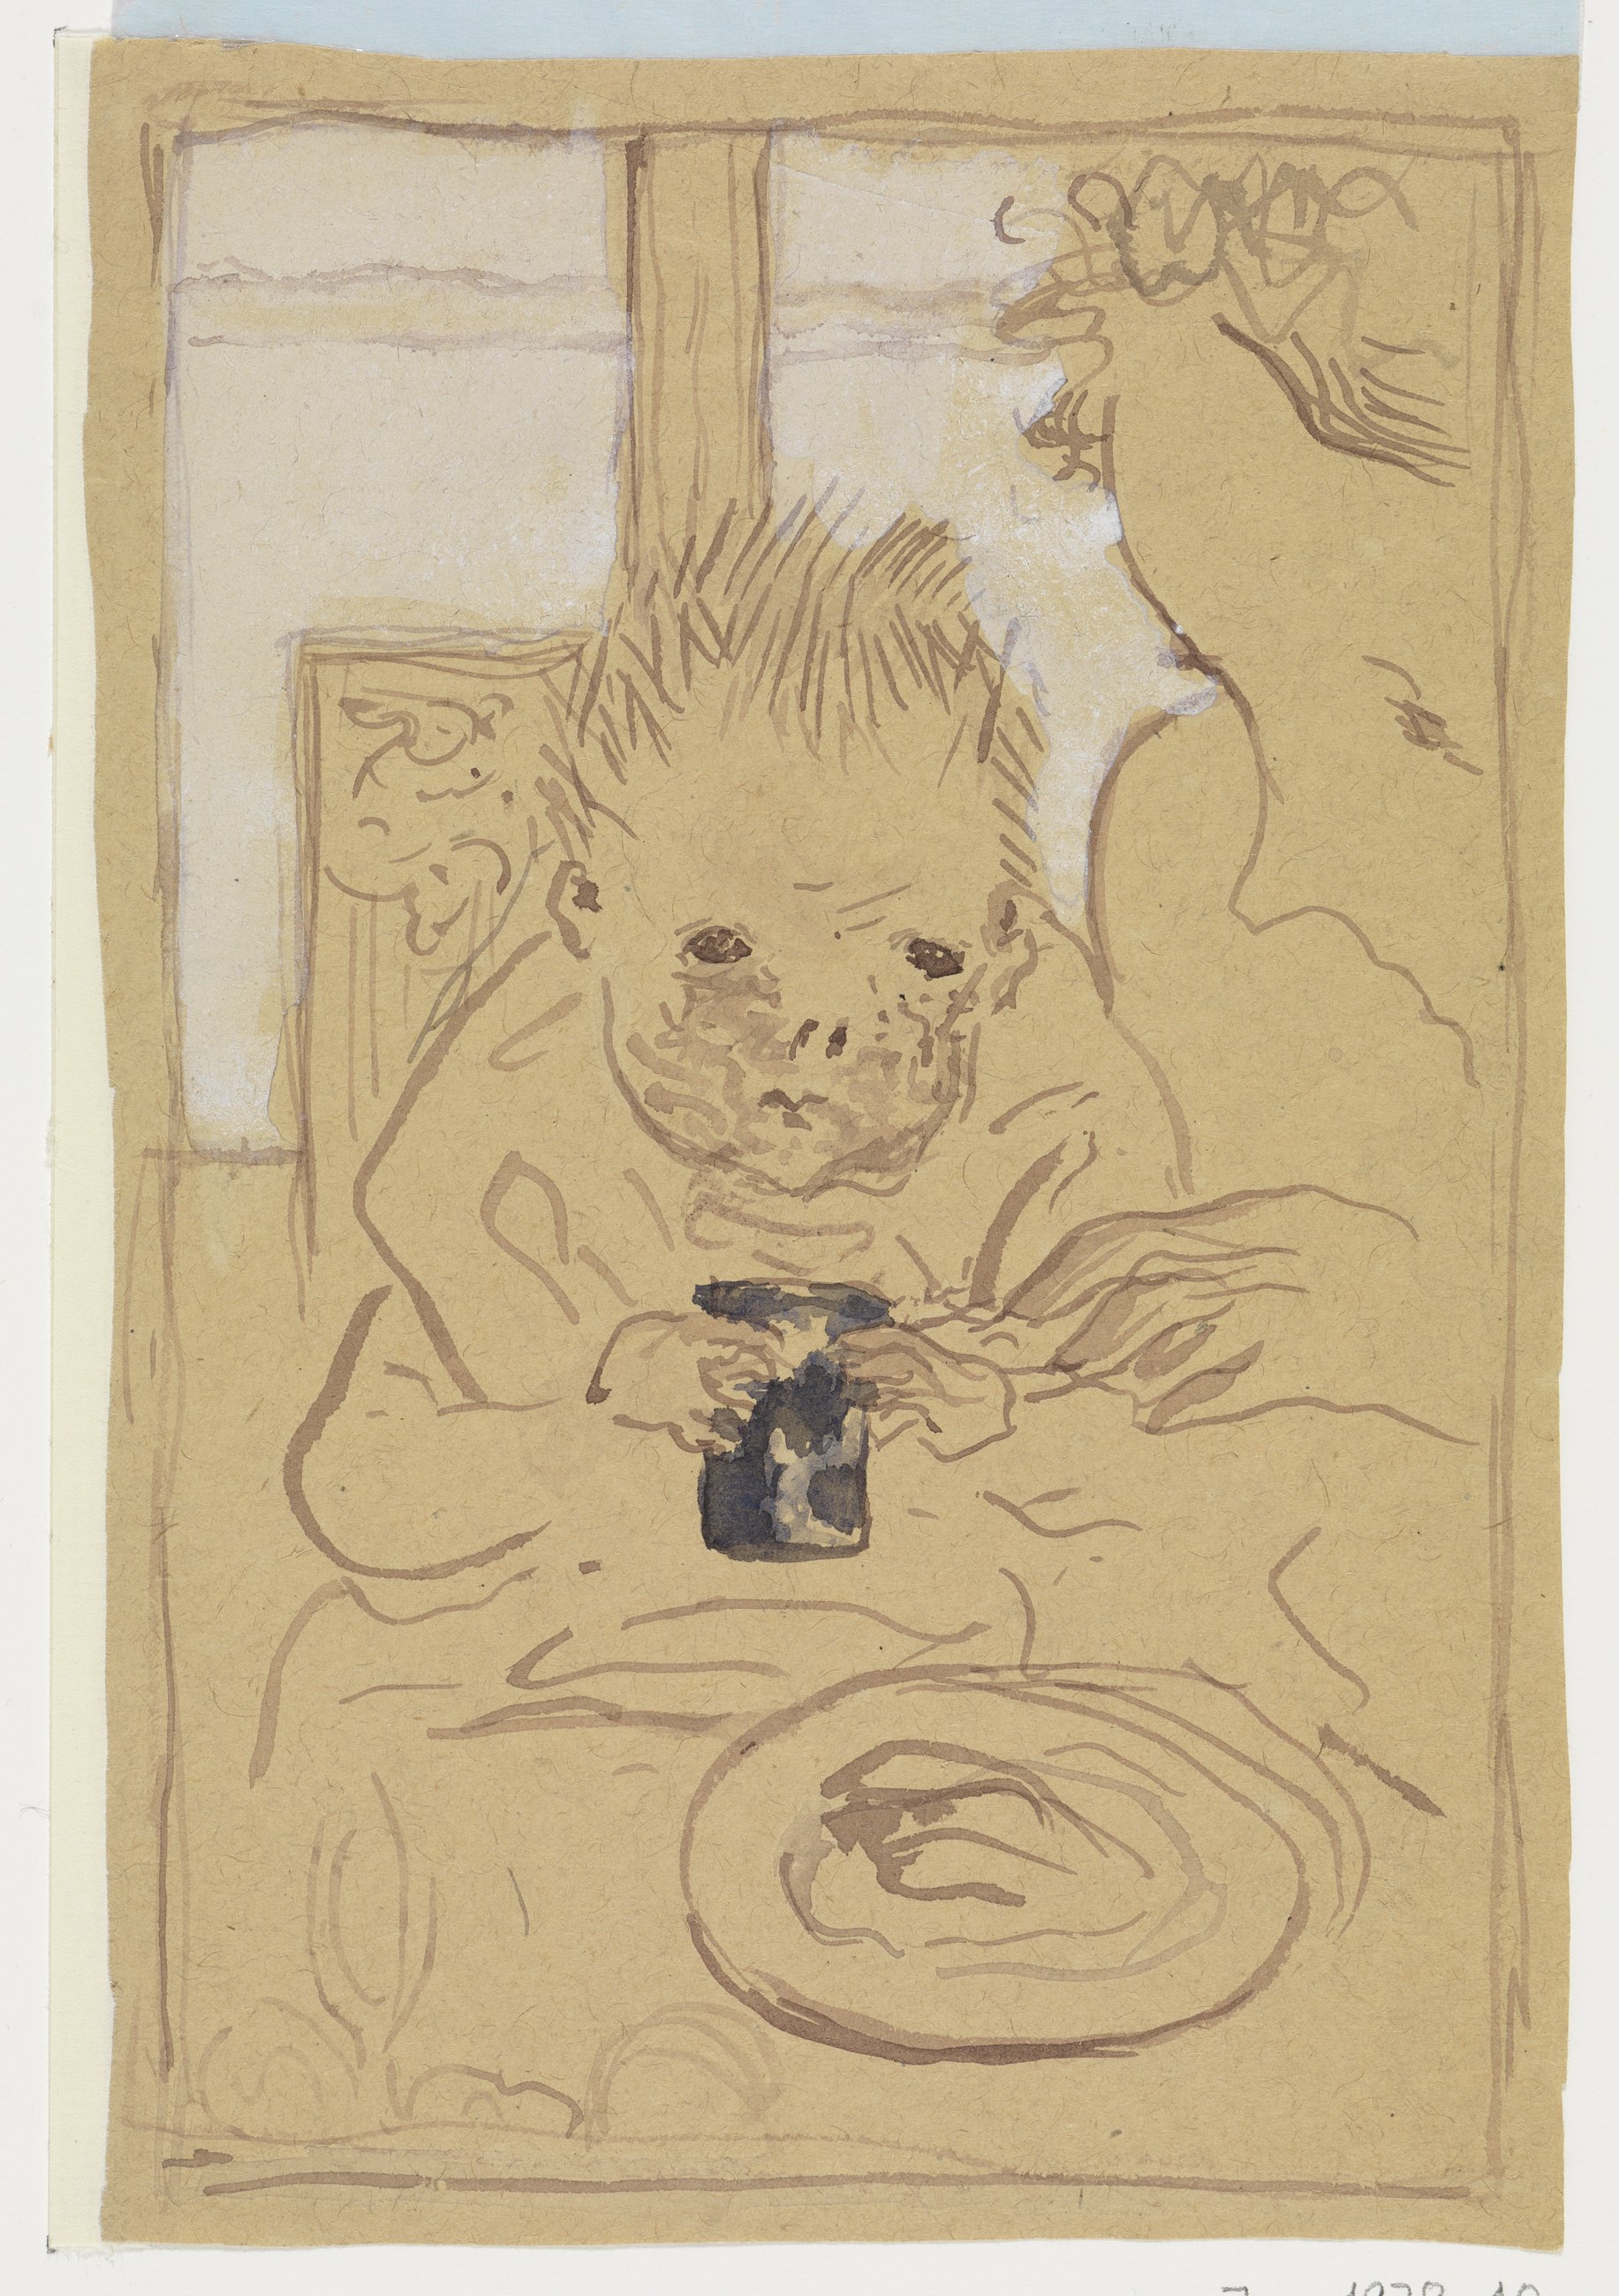 Illustration of the work Mother and Child by Pierre Bonnard, created in 1893/94 from the collection of the Kunsthalle Karlsruhe. The picture is very abstract but you can see a child sitting with an object in his hand.